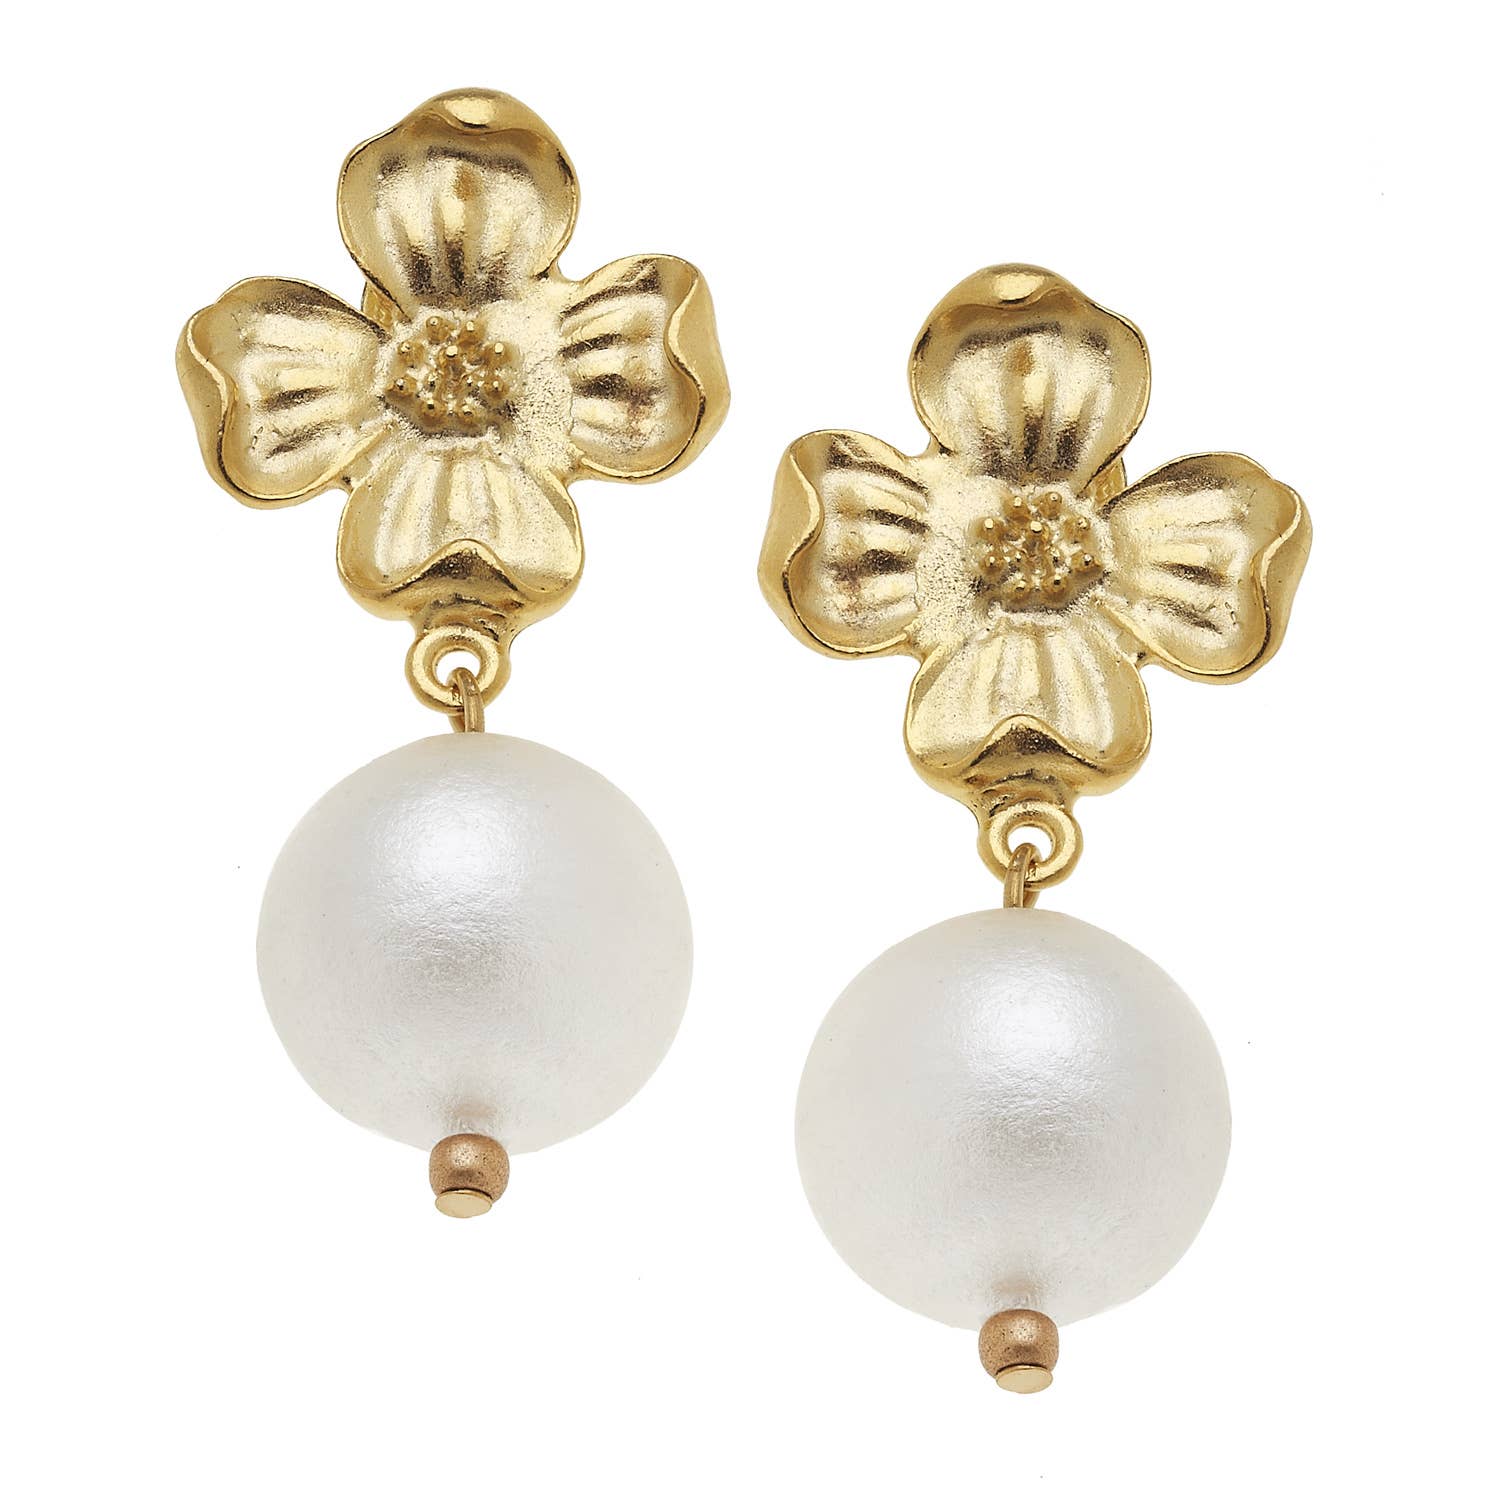 Dogwood and Cotton Pearl Earrings